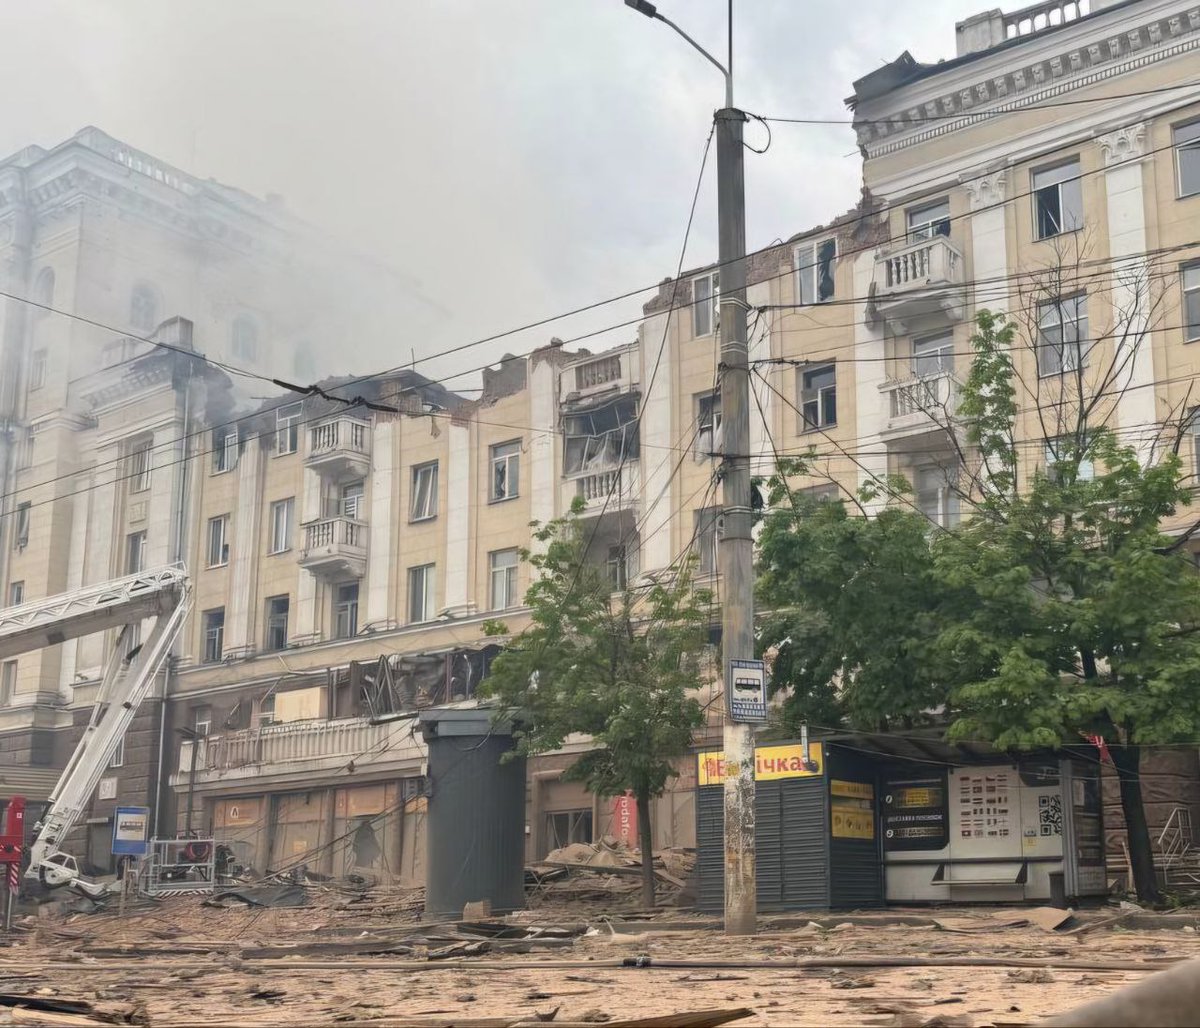 At least, two murdered, including an 8yo kid, and 15 injured in Dnipro, multiple damage to civilian infrastructure in the city and the region. This is the cost of inaction